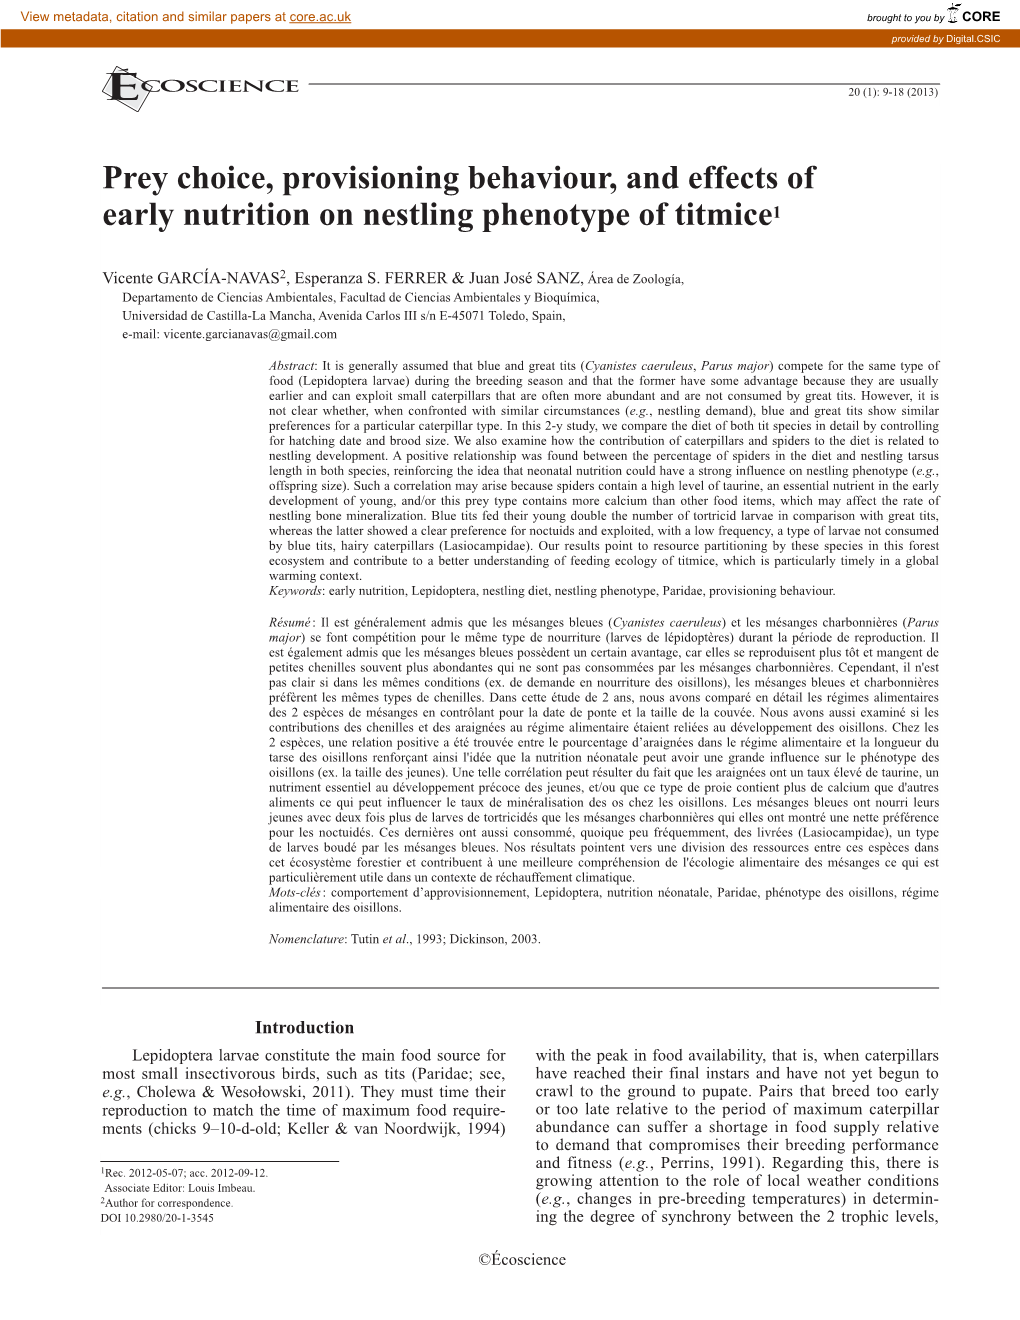 Prey Choice, Provisioning Behaviour, and Effects of Early Nutrition on Nestling Phenotype of Titmice1